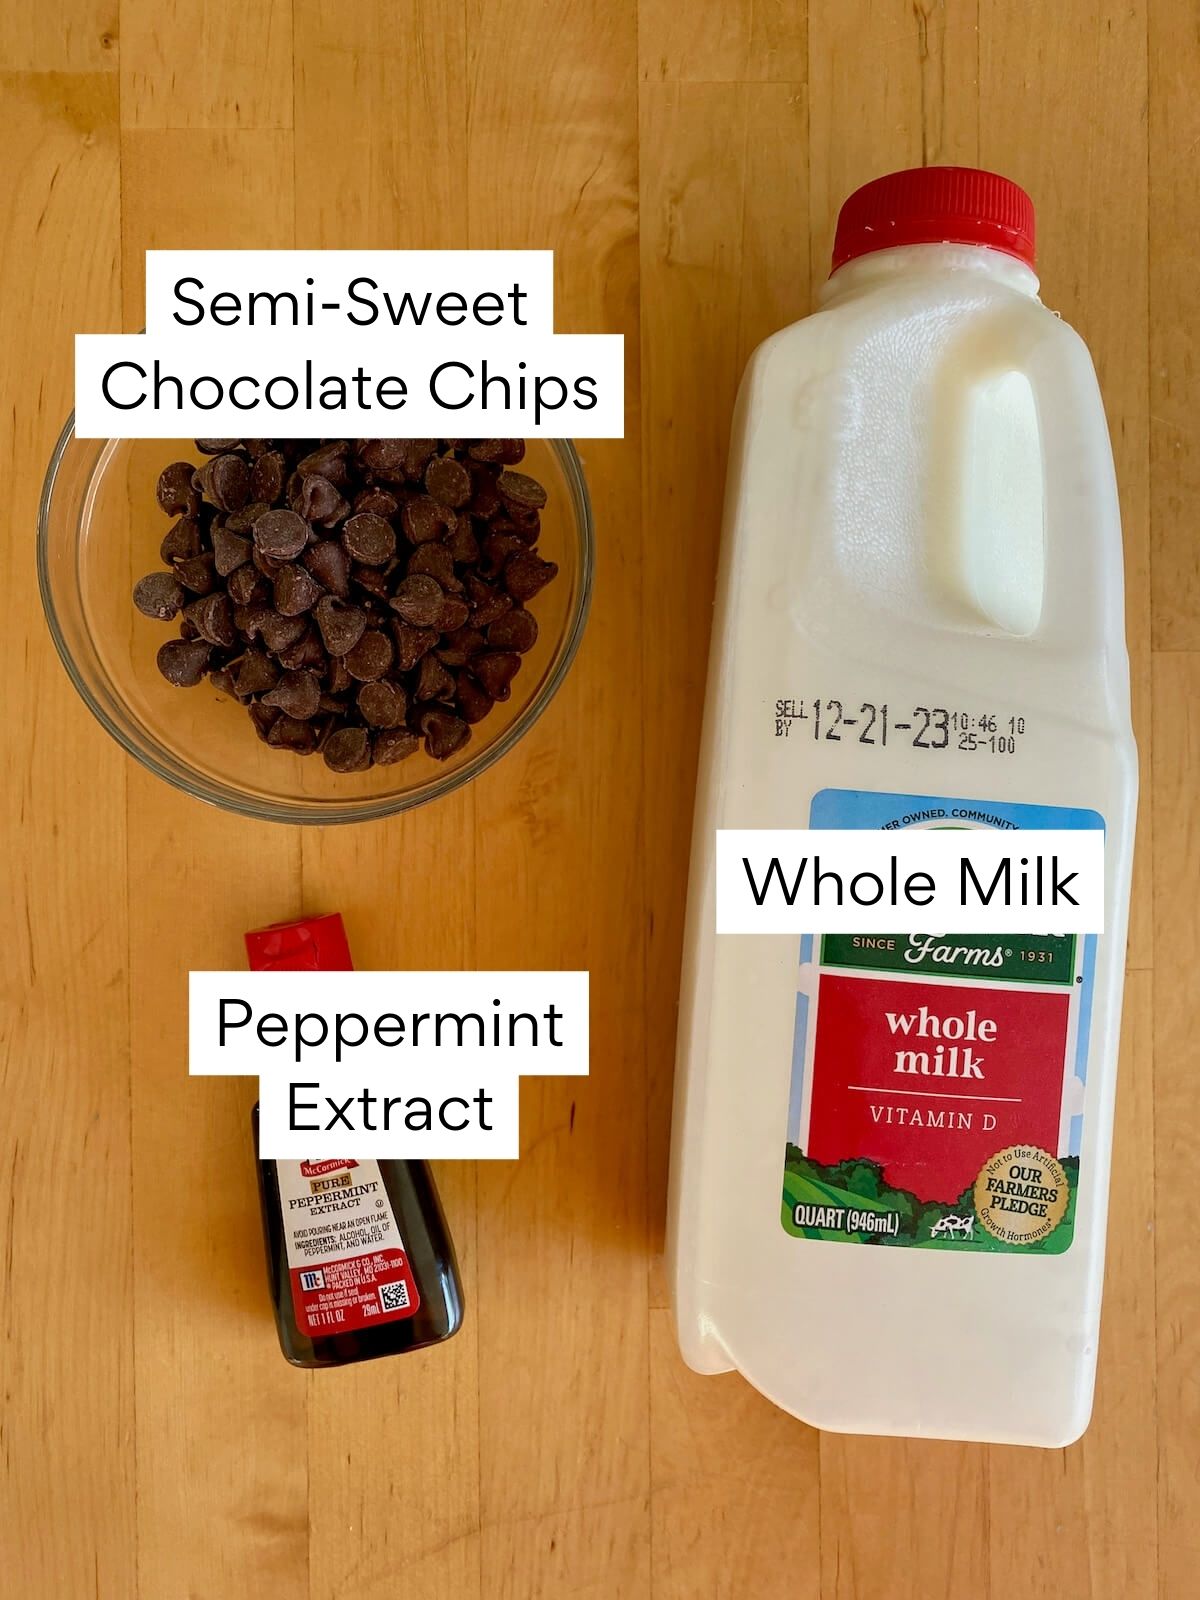 The ingredients to make peppermint hot chocolate. Each ingredient is labeled with text. They include semi-sweet chocolate chips, peppermint extract, and whole milk.